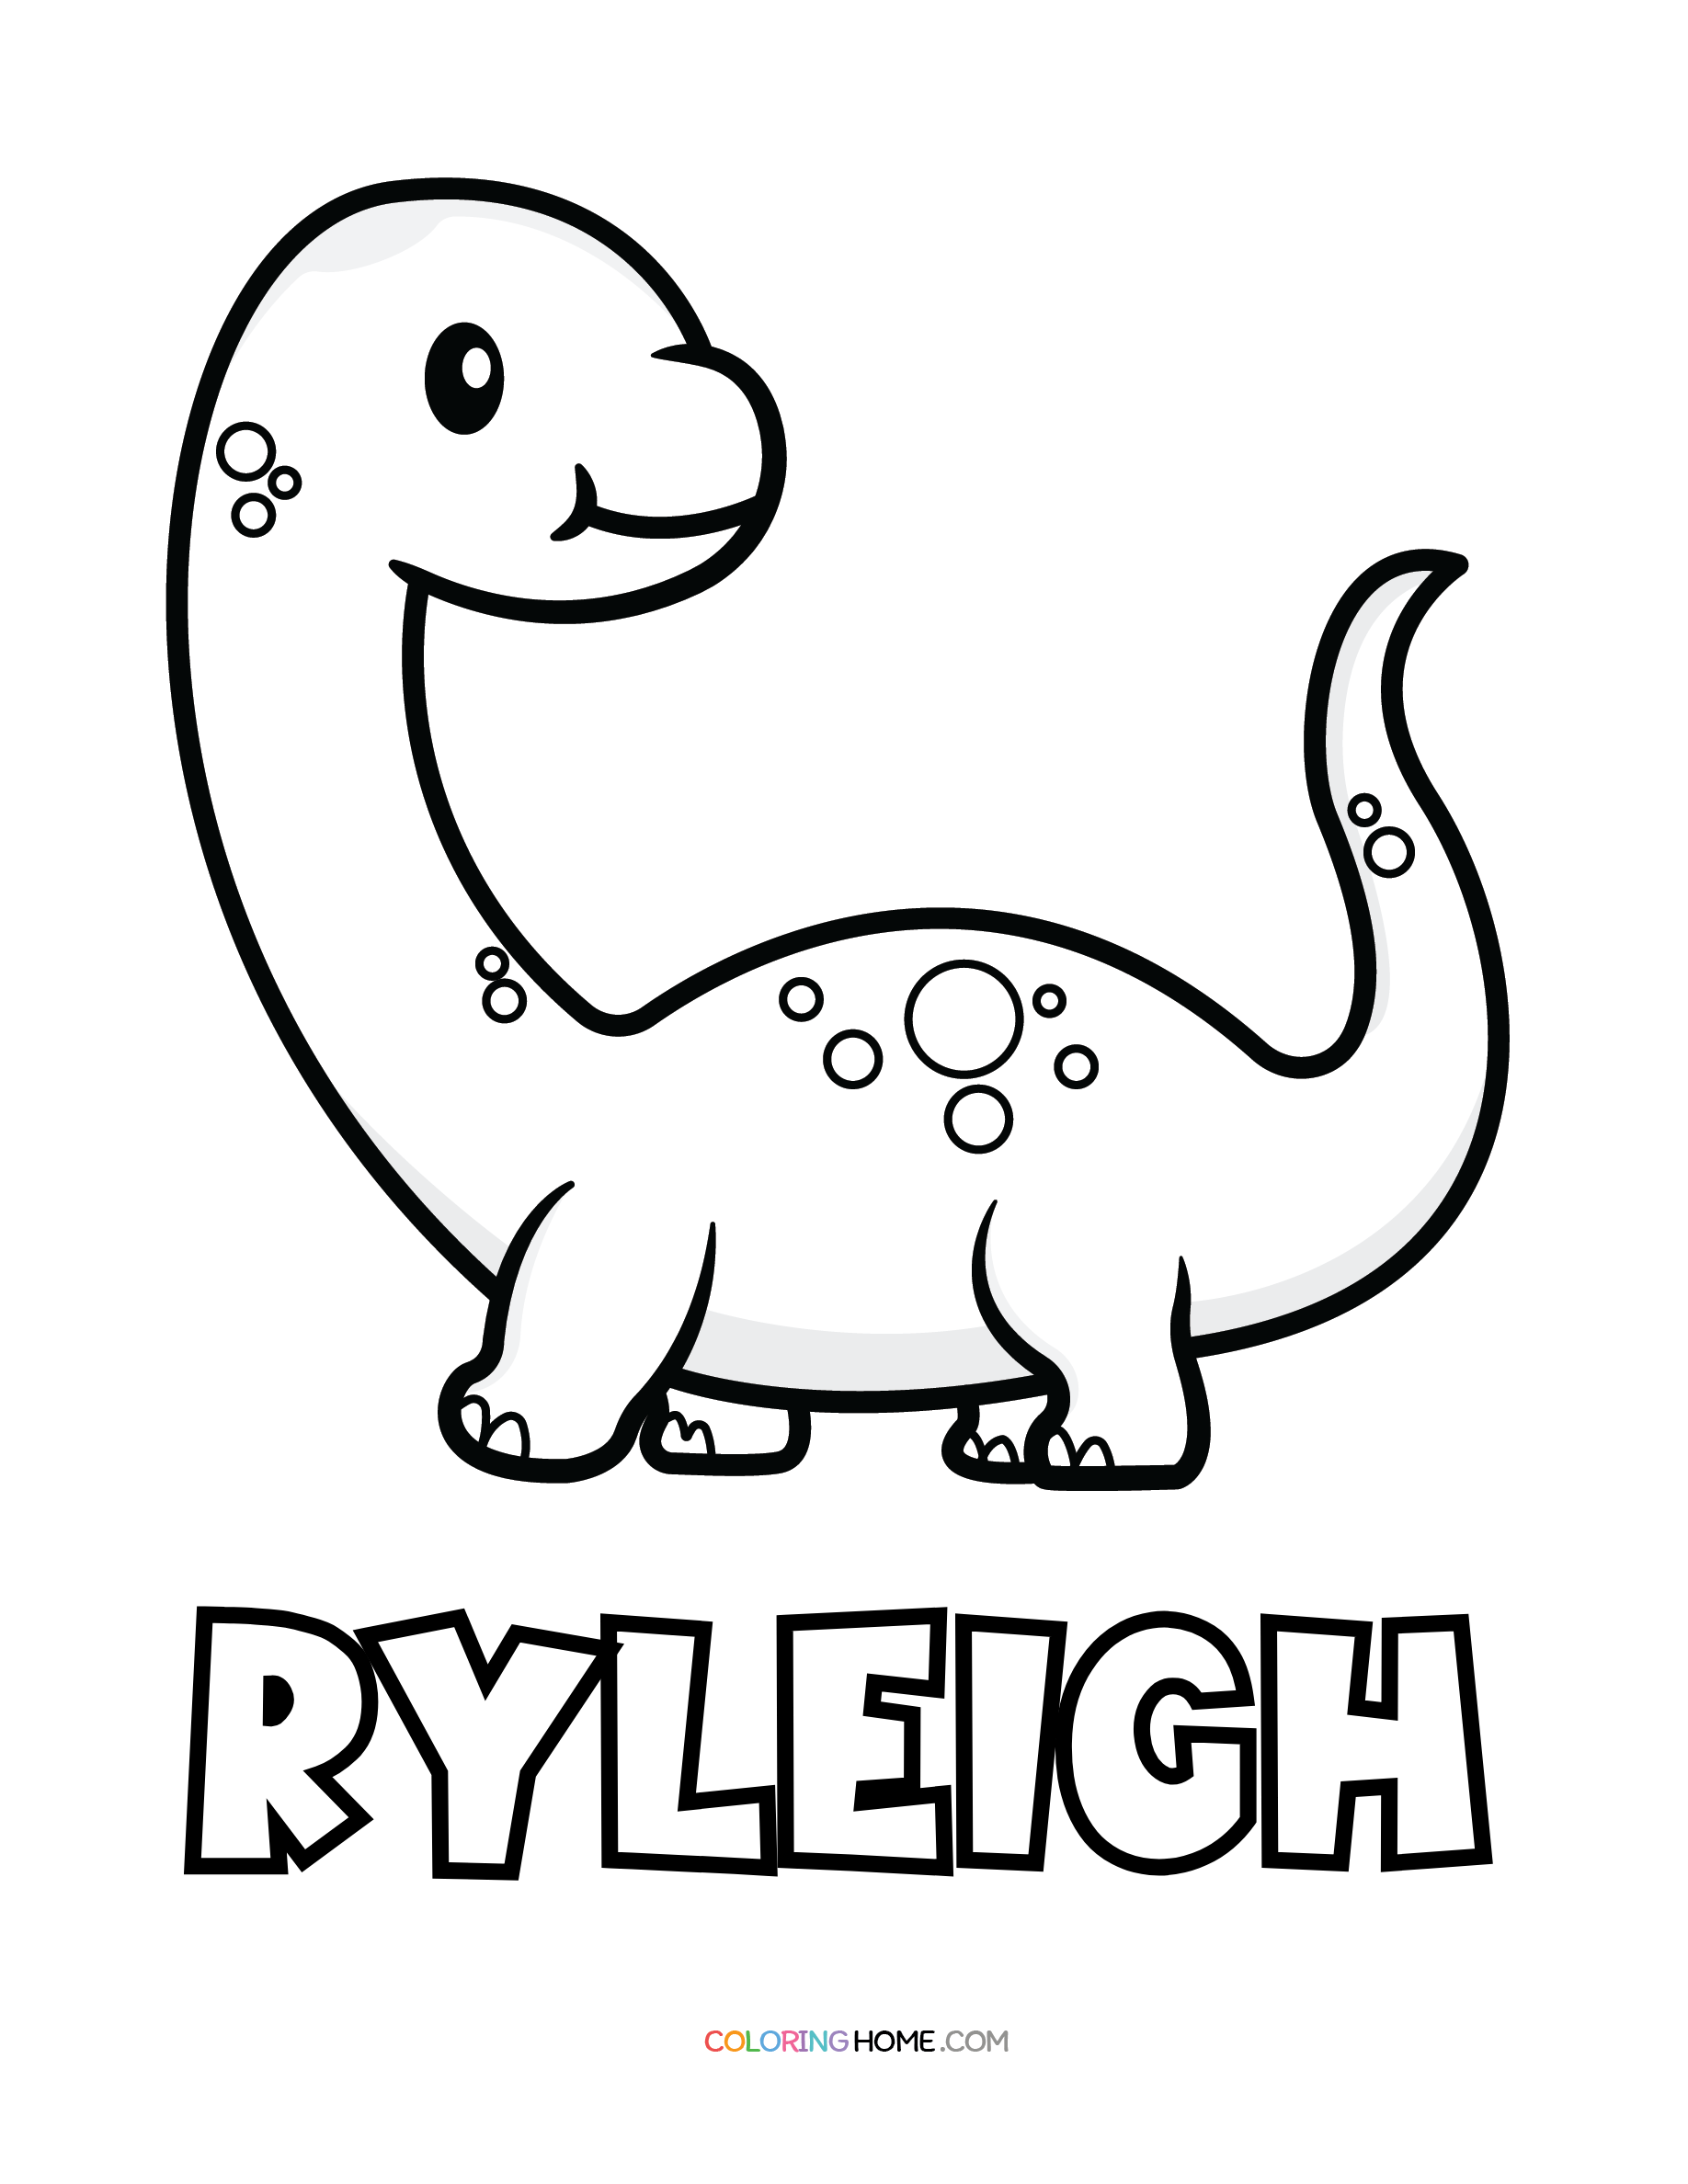 Ryleigh dinosaur coloring page